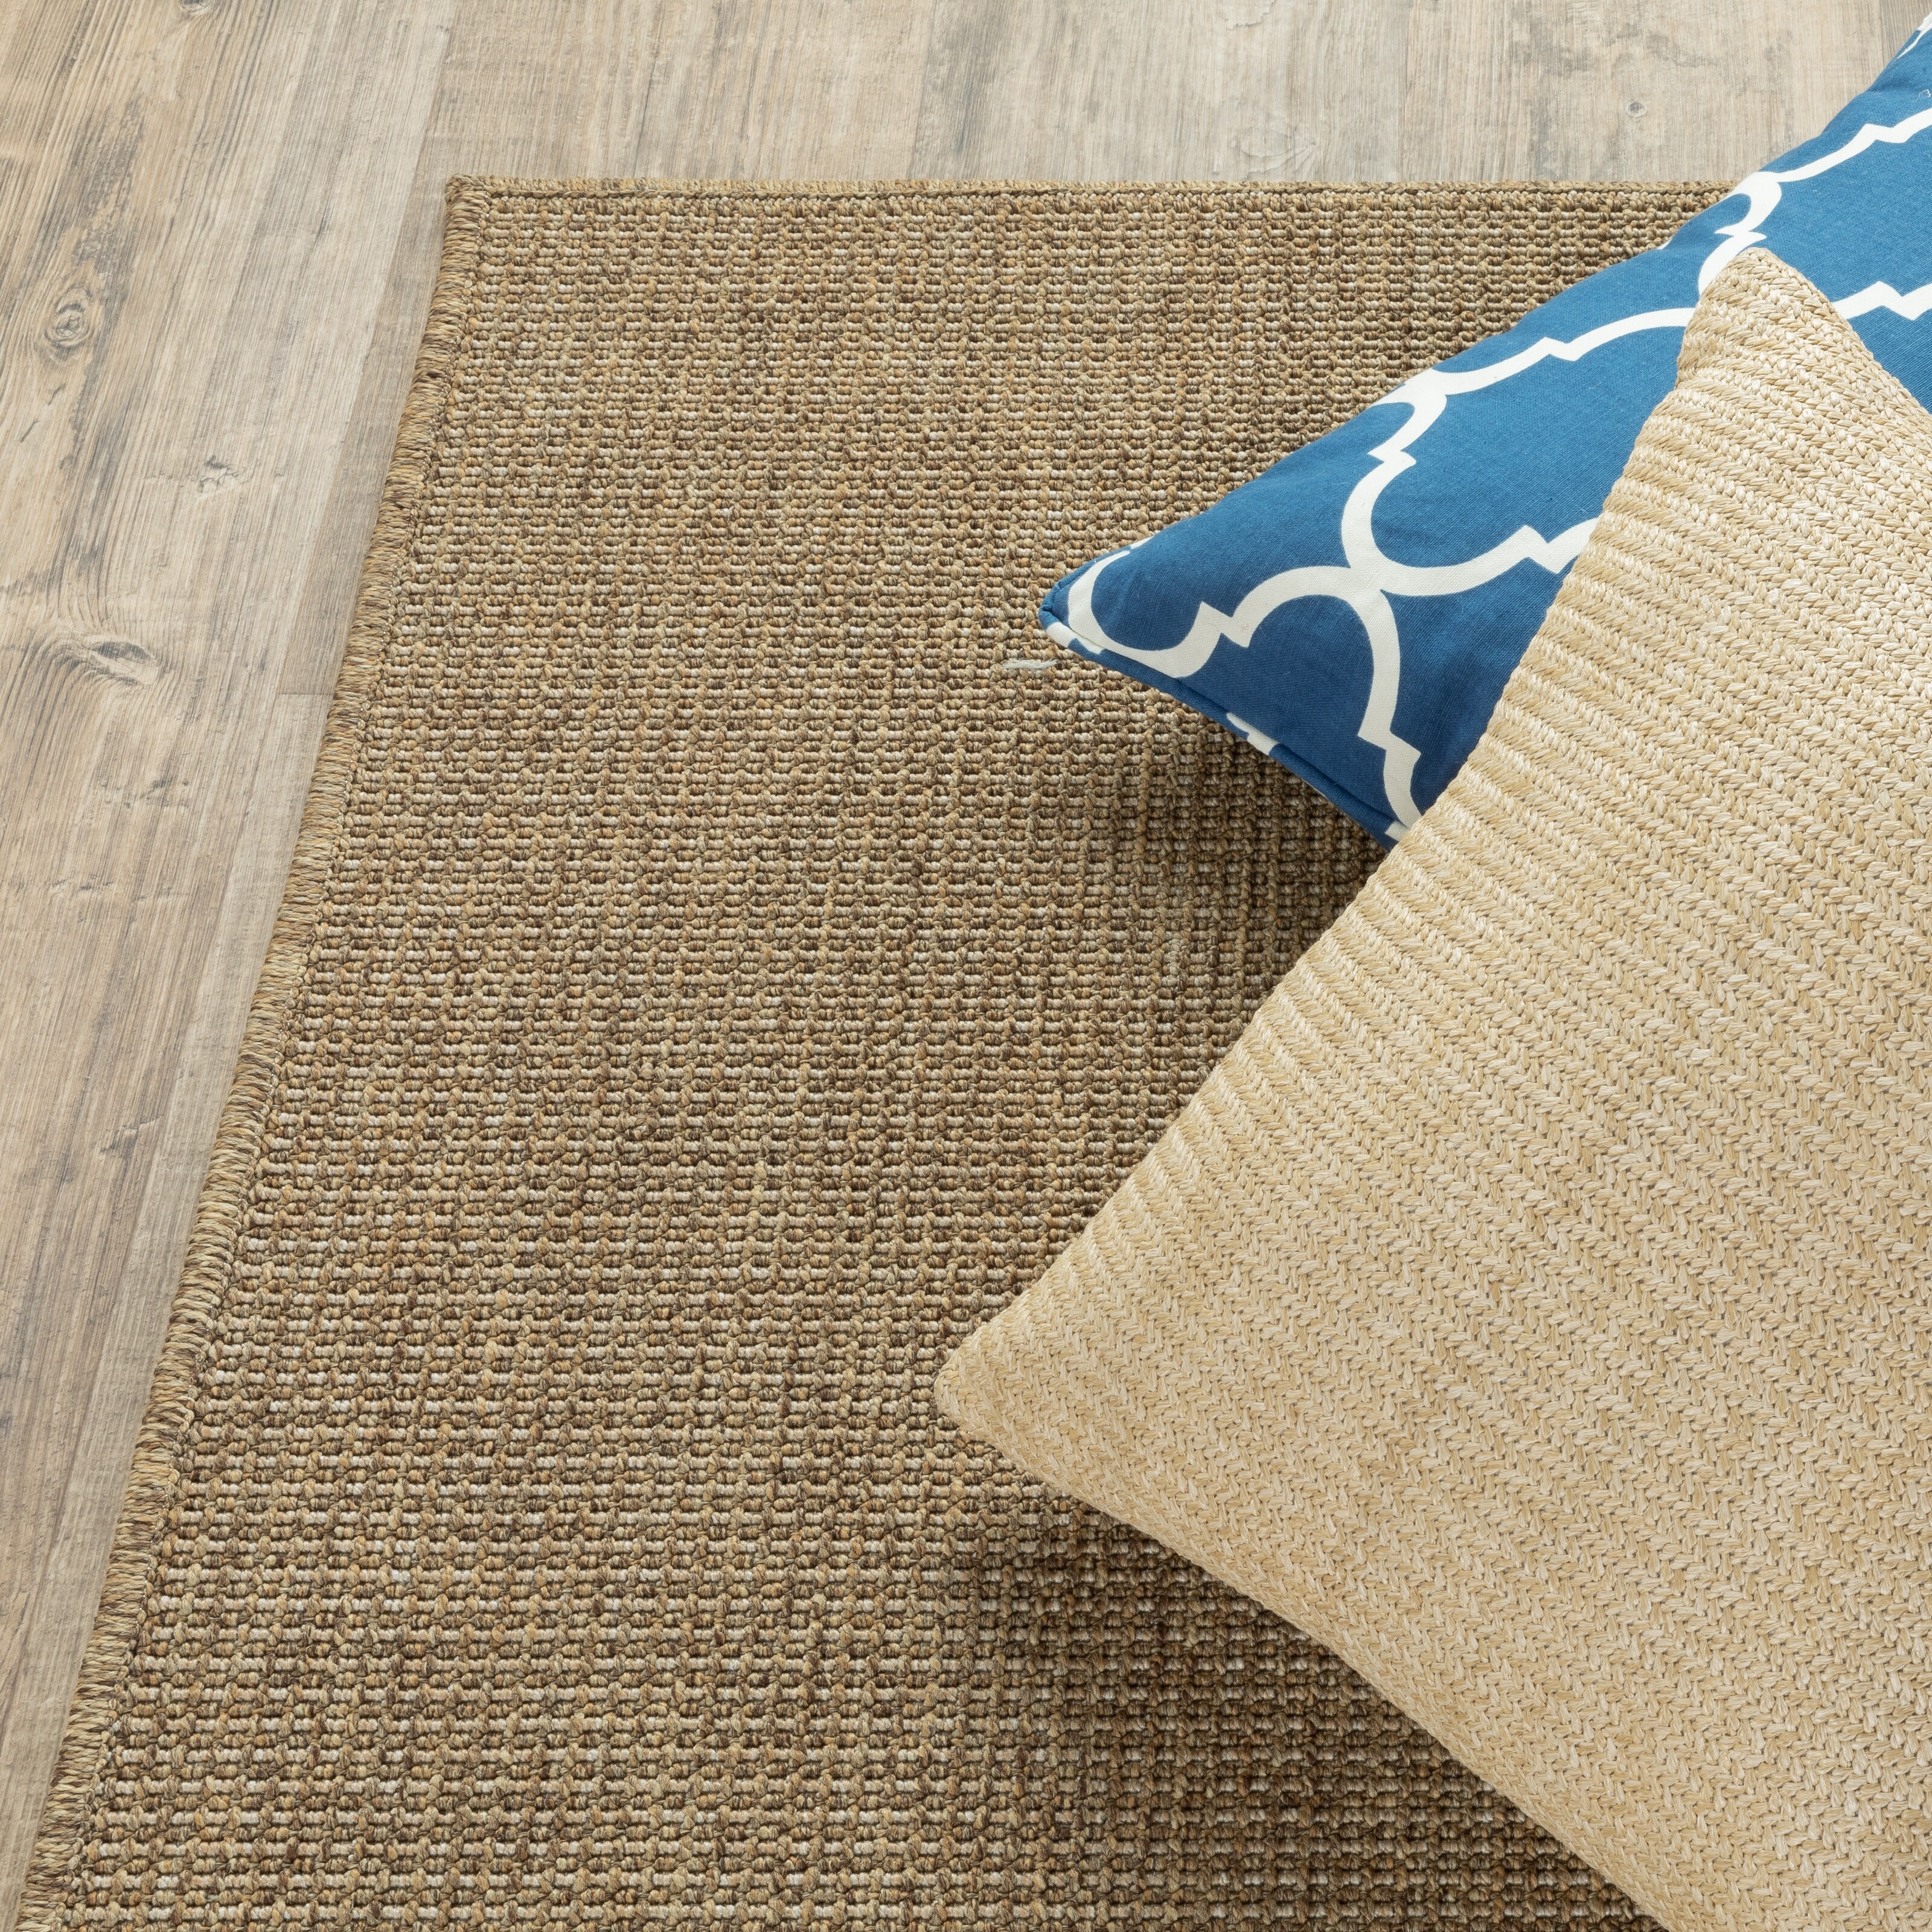 https://ak1.ostkcdn.com/images/products/is/images/direct/5c972a786fe48a229fdf7f37a74071627cf9ce1b/Outdoor-Indoor-Tan-Area-Rug.jpg